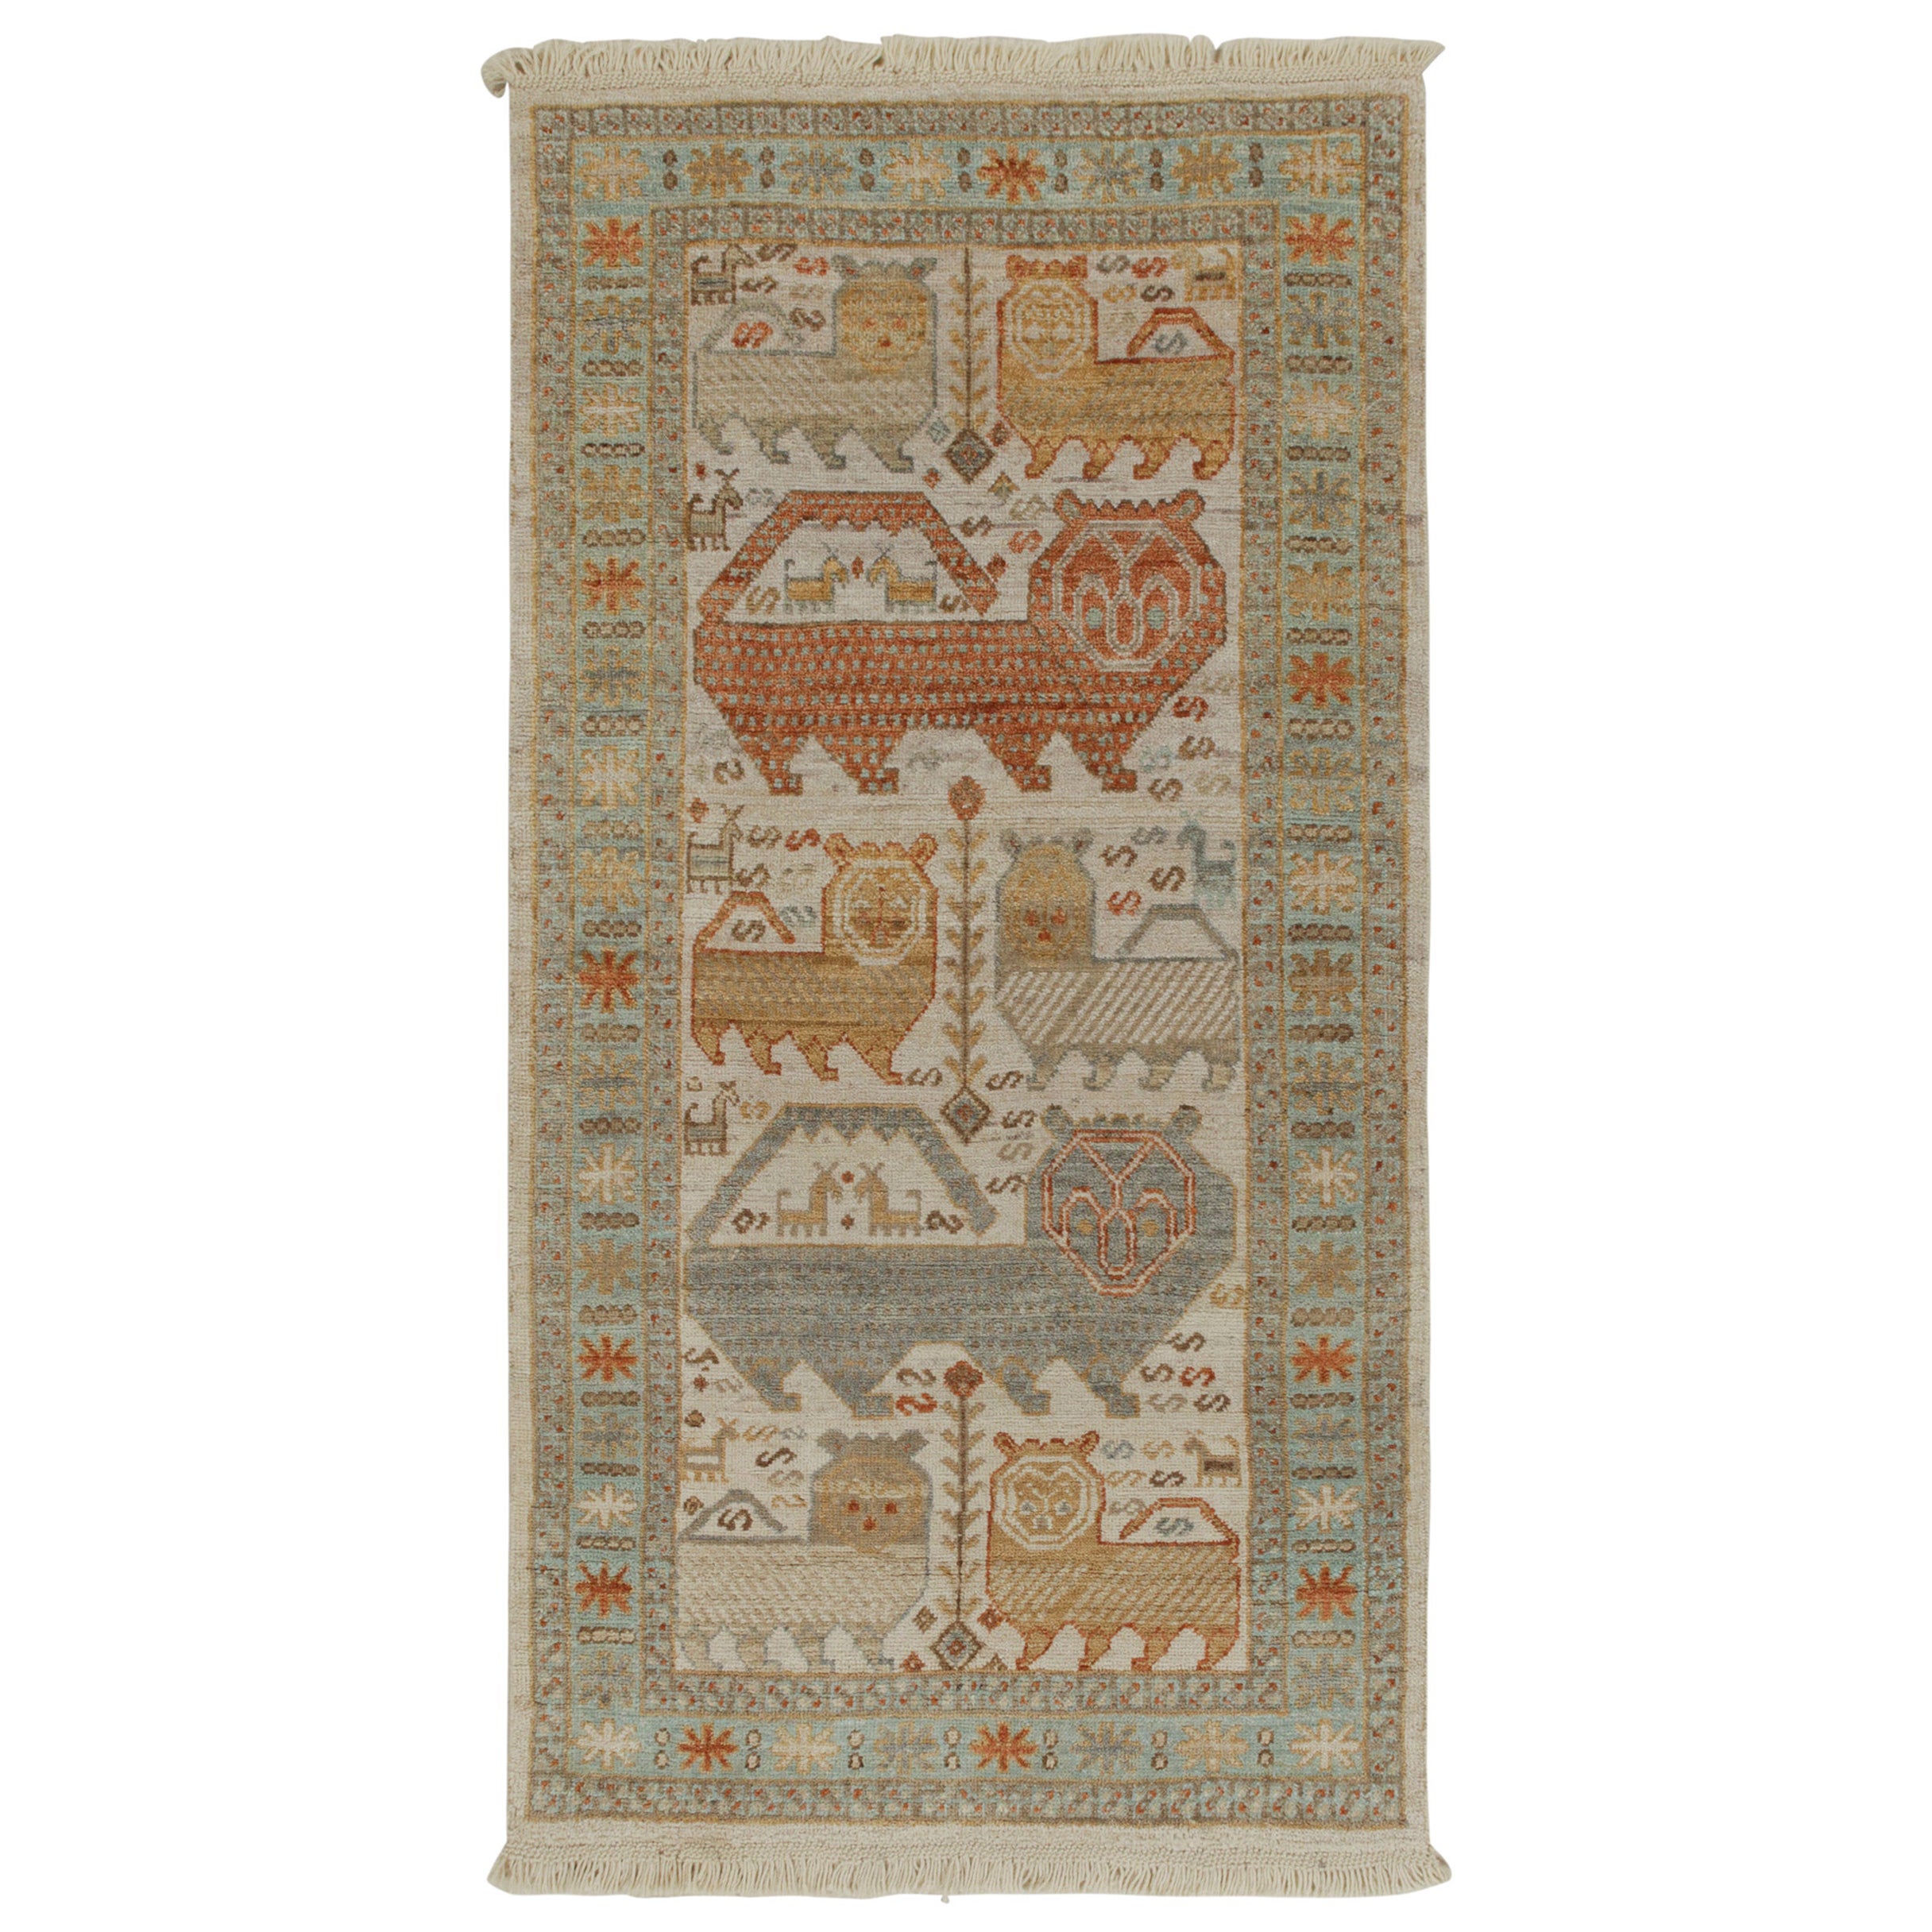  Rug & Kilim’s Tribal style runner in Beige-Brown, Blue and Red Pictorials